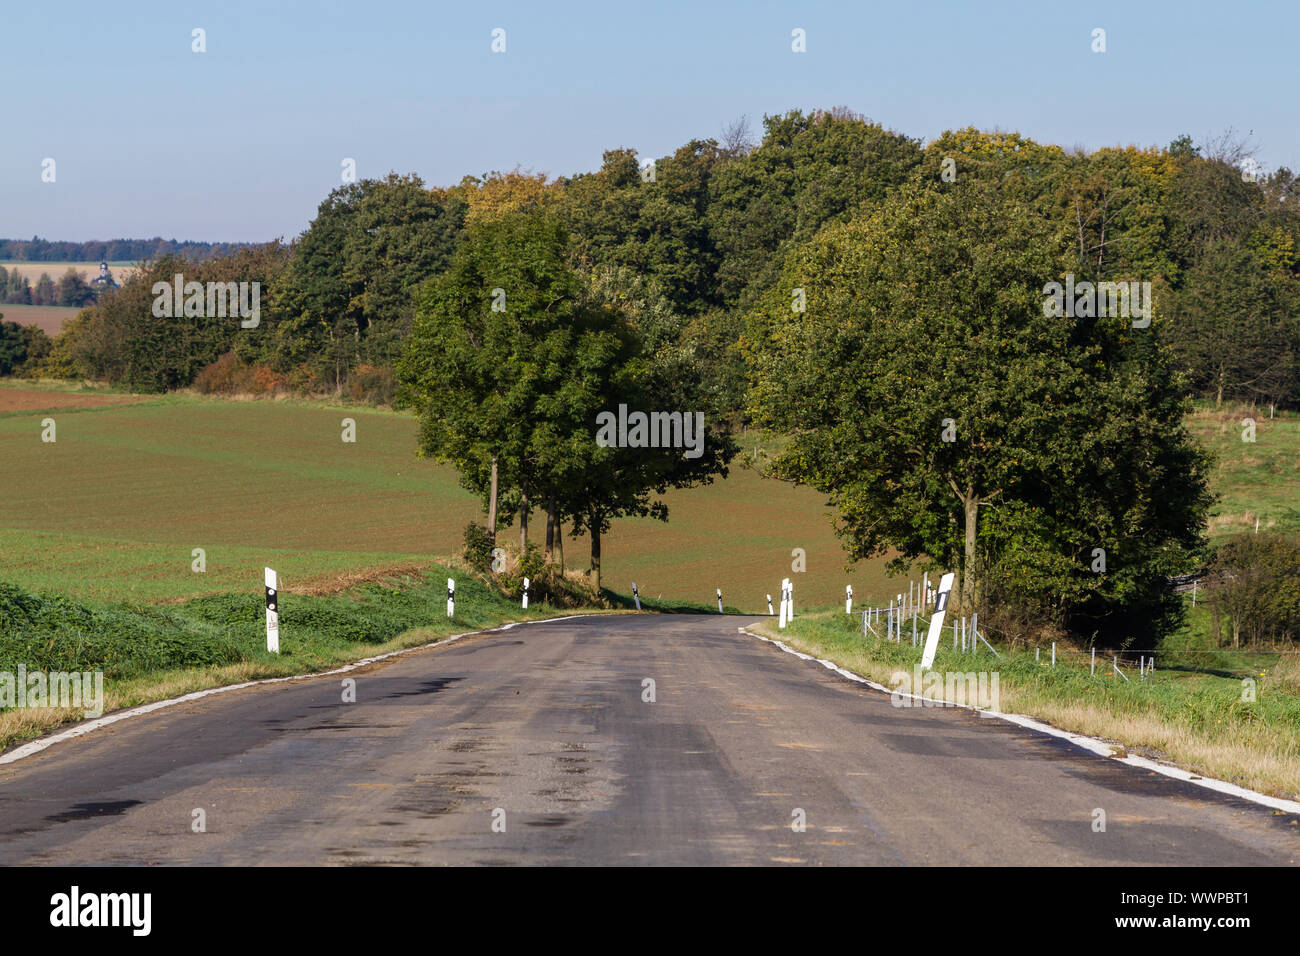 country road in bad condition Stock Photo